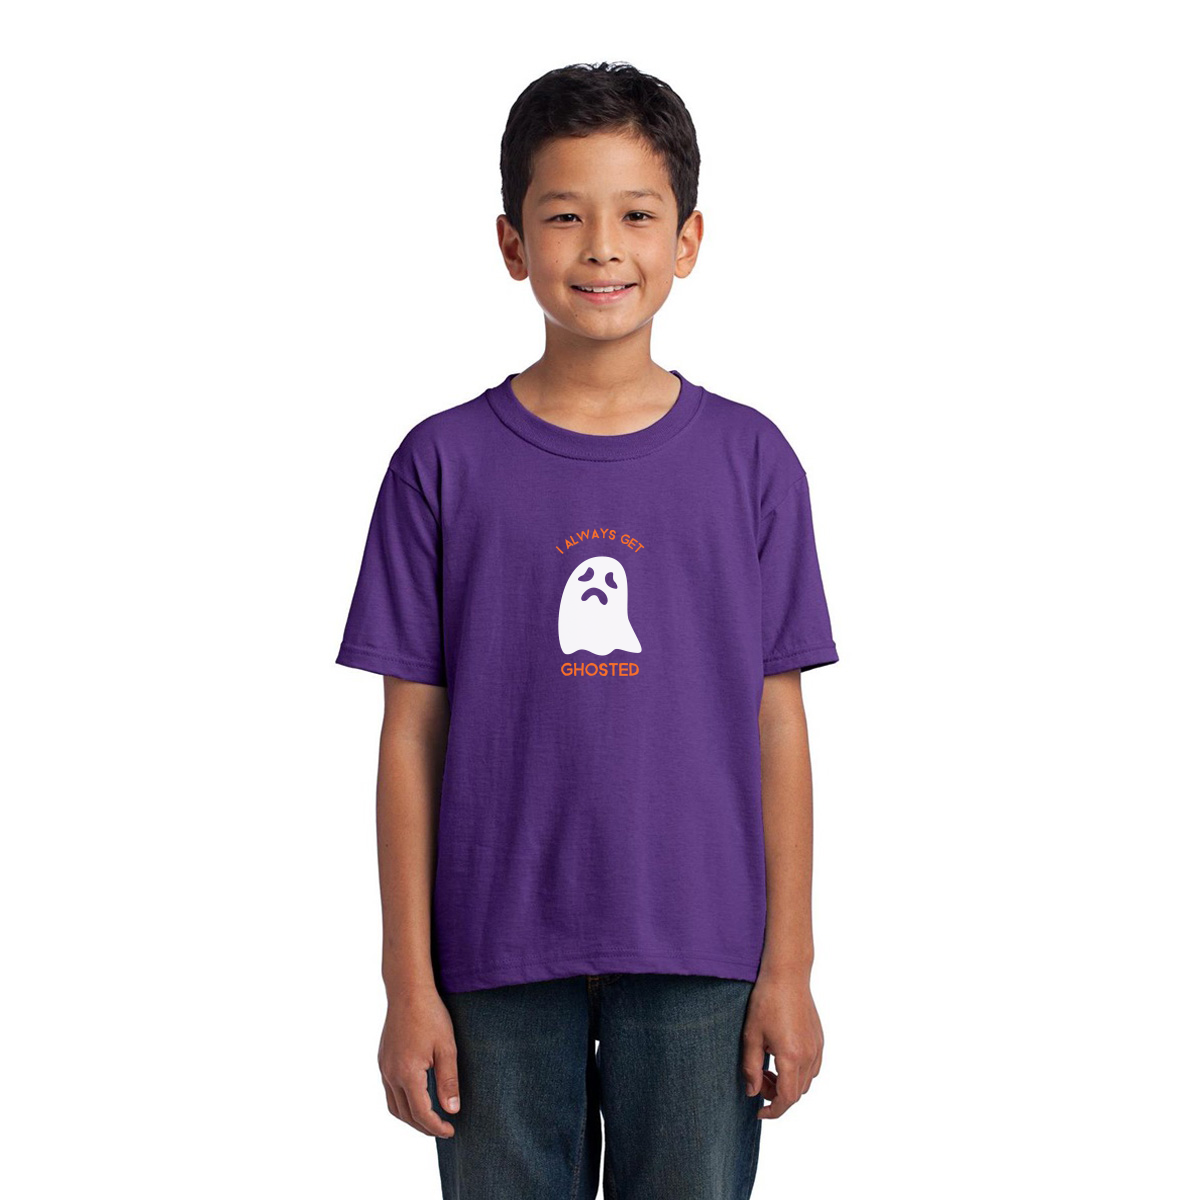 I Always Get Ghosted Kids T-shirt | Purple